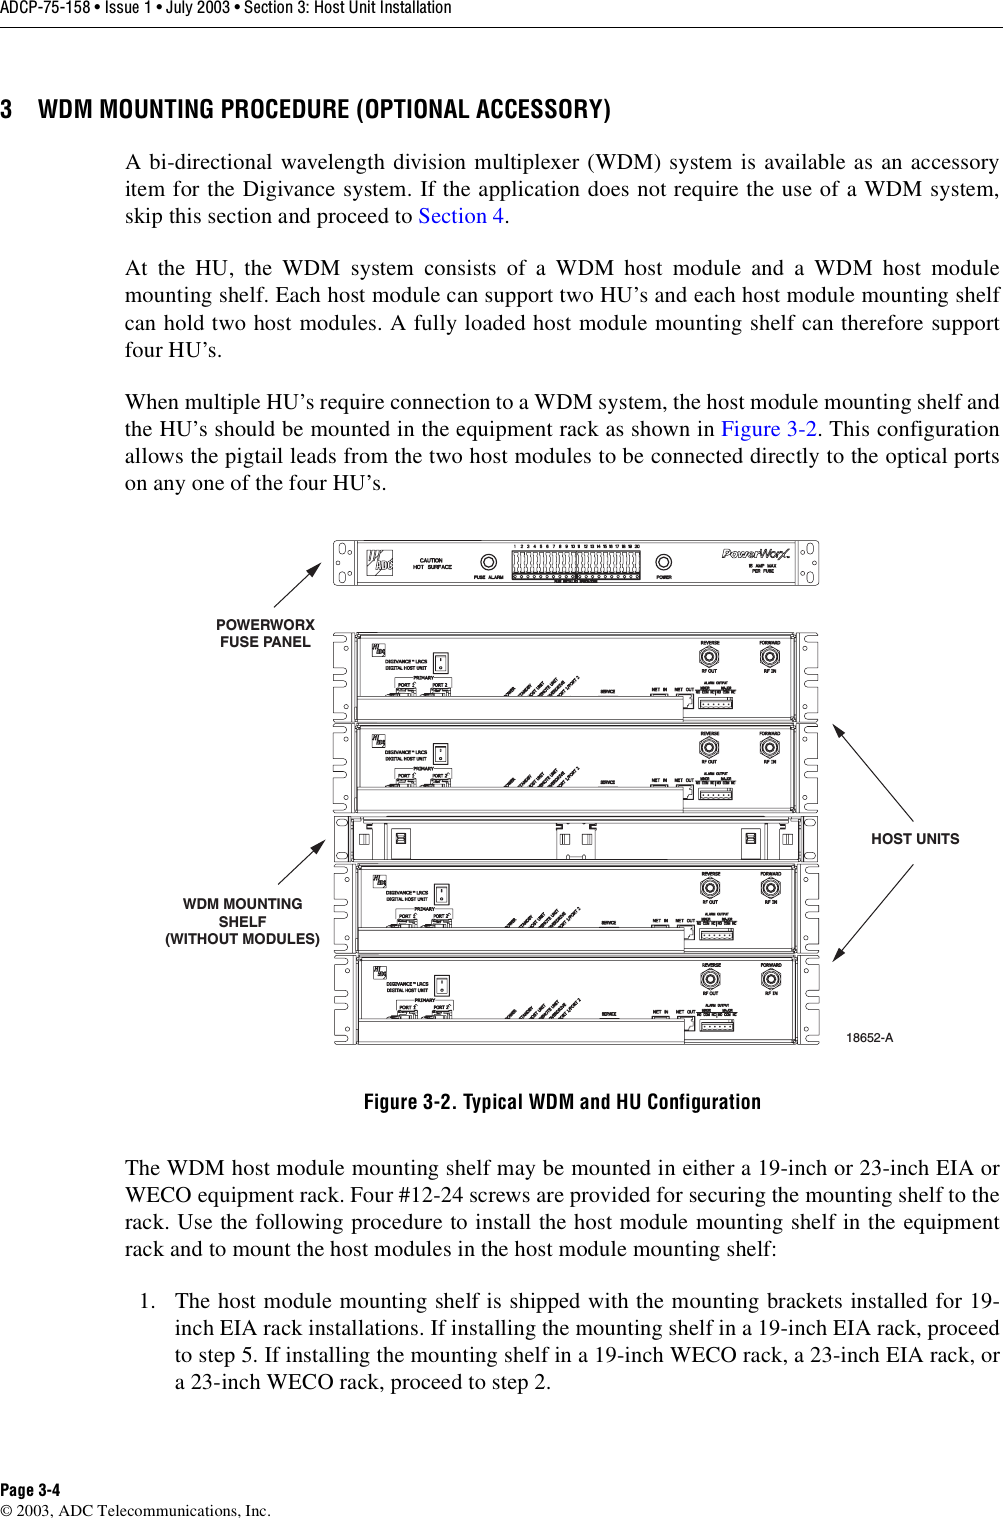 ADCP-75-158 • Issue 1 • July 2003 • Section 3: Host Unit InstallationPage 3-4© 2003, ADC Telecommunications, Inc.3 WDM MOUNTING PROCEDURE (OPTIONAL ACCESSORY)A bi-directional wavelength division multiplexer (WDM) system is available as an accessoryitem for the Digivance system. If the application does not require the use of a WDM system,skip this section and proceed to Section 4. At the HU, the WDM system consists of a WDM host module and a WDM host modulemounting shelf. Each host module can support two HU’s and each host module mounting shelfcan hold two host modules. A fully loaded host module mounting shelf can therefore supportfour HU’s. When multiple HU’s require connection to a WDM system, the host module mounting shelf andthe HU’s should be mounted in the equipment rack as shown in Figure 3-2. This configurationallows the pigtail leads from the two host modules to be connected directly to the optical portson any one of the four HU’s. Figure 3-2. Typical WDM and HU ConfigurationThe WDM host module mounting shelf may be mounted in either a 19-inch or 23-inch EIA orWECO equipment rack. Four #12-24 screws are provided for securing the mounting shelf to therack. Use the following procedure to install the host module mounting shelf in the equipmentrack and to mount the host modules in the host module mounting shelf: 1. The host module mounting shelf is shipped with the mounting brackets installed for 19-inch EIA rack installations. If installing the mounting shelf in a 19-inch EIA rack, proceedto step 5. If installing the mounting shelf in a 19-inch WECO rack, a 23-inch EIA rack, ora 23-inch WECO rack, proceed to step 2. WDM MOUNTINGSHELF(WITHOUT MODULES)18652-APOWERWORXFUSE PANELHOST UNITS